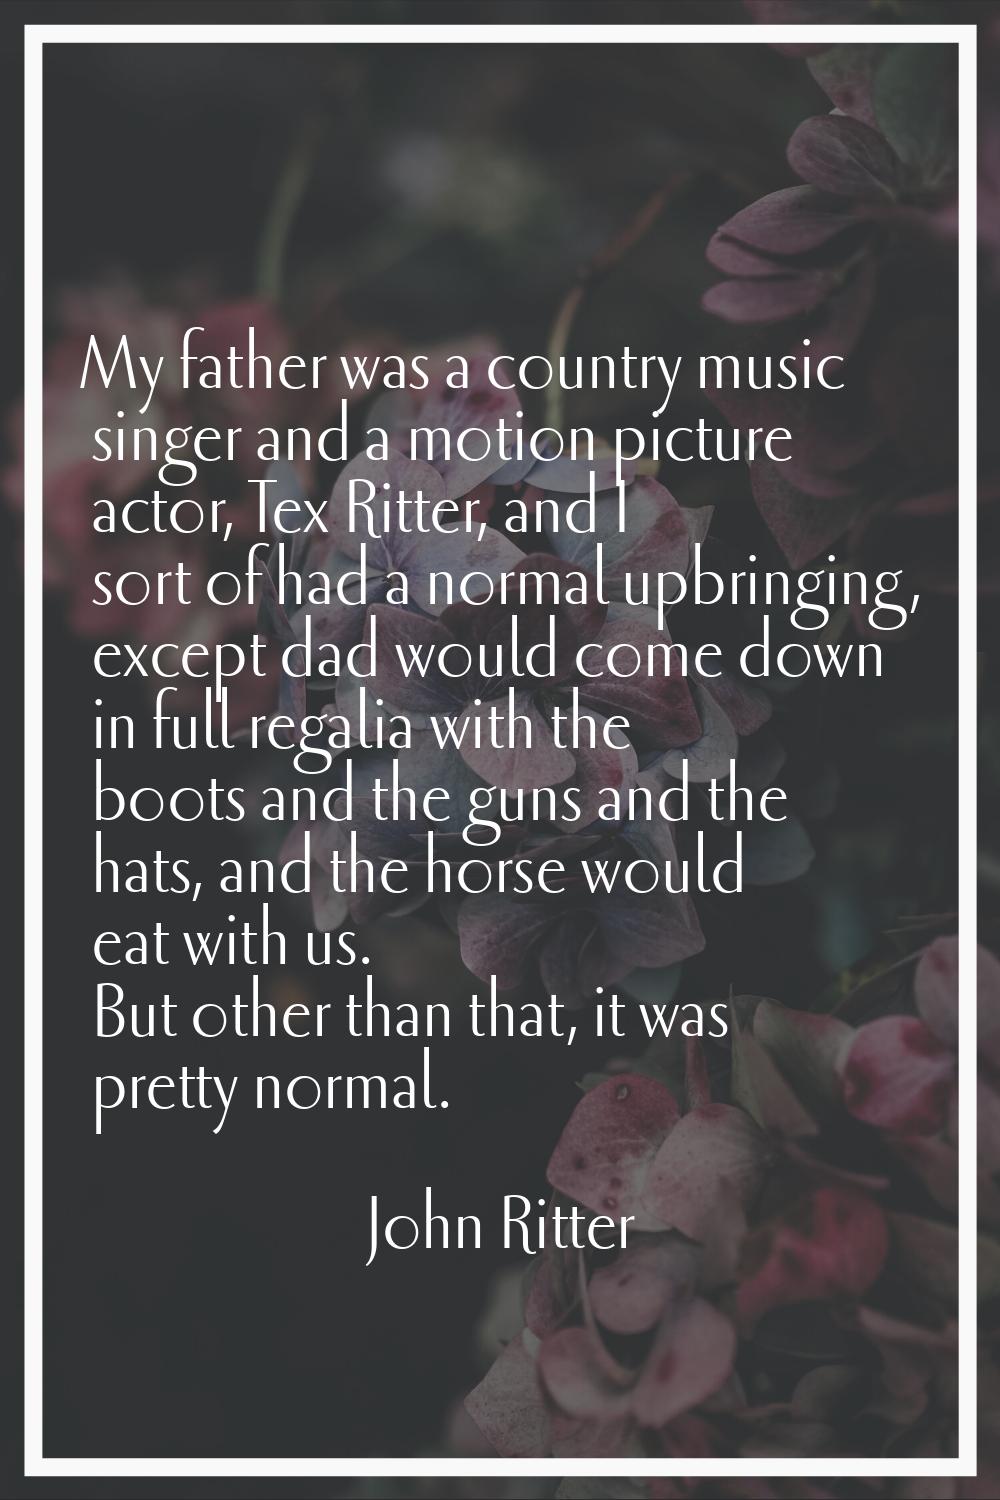 My father was a country music singer and a motion picture actor, Tex Ritter, and I sort of had a no